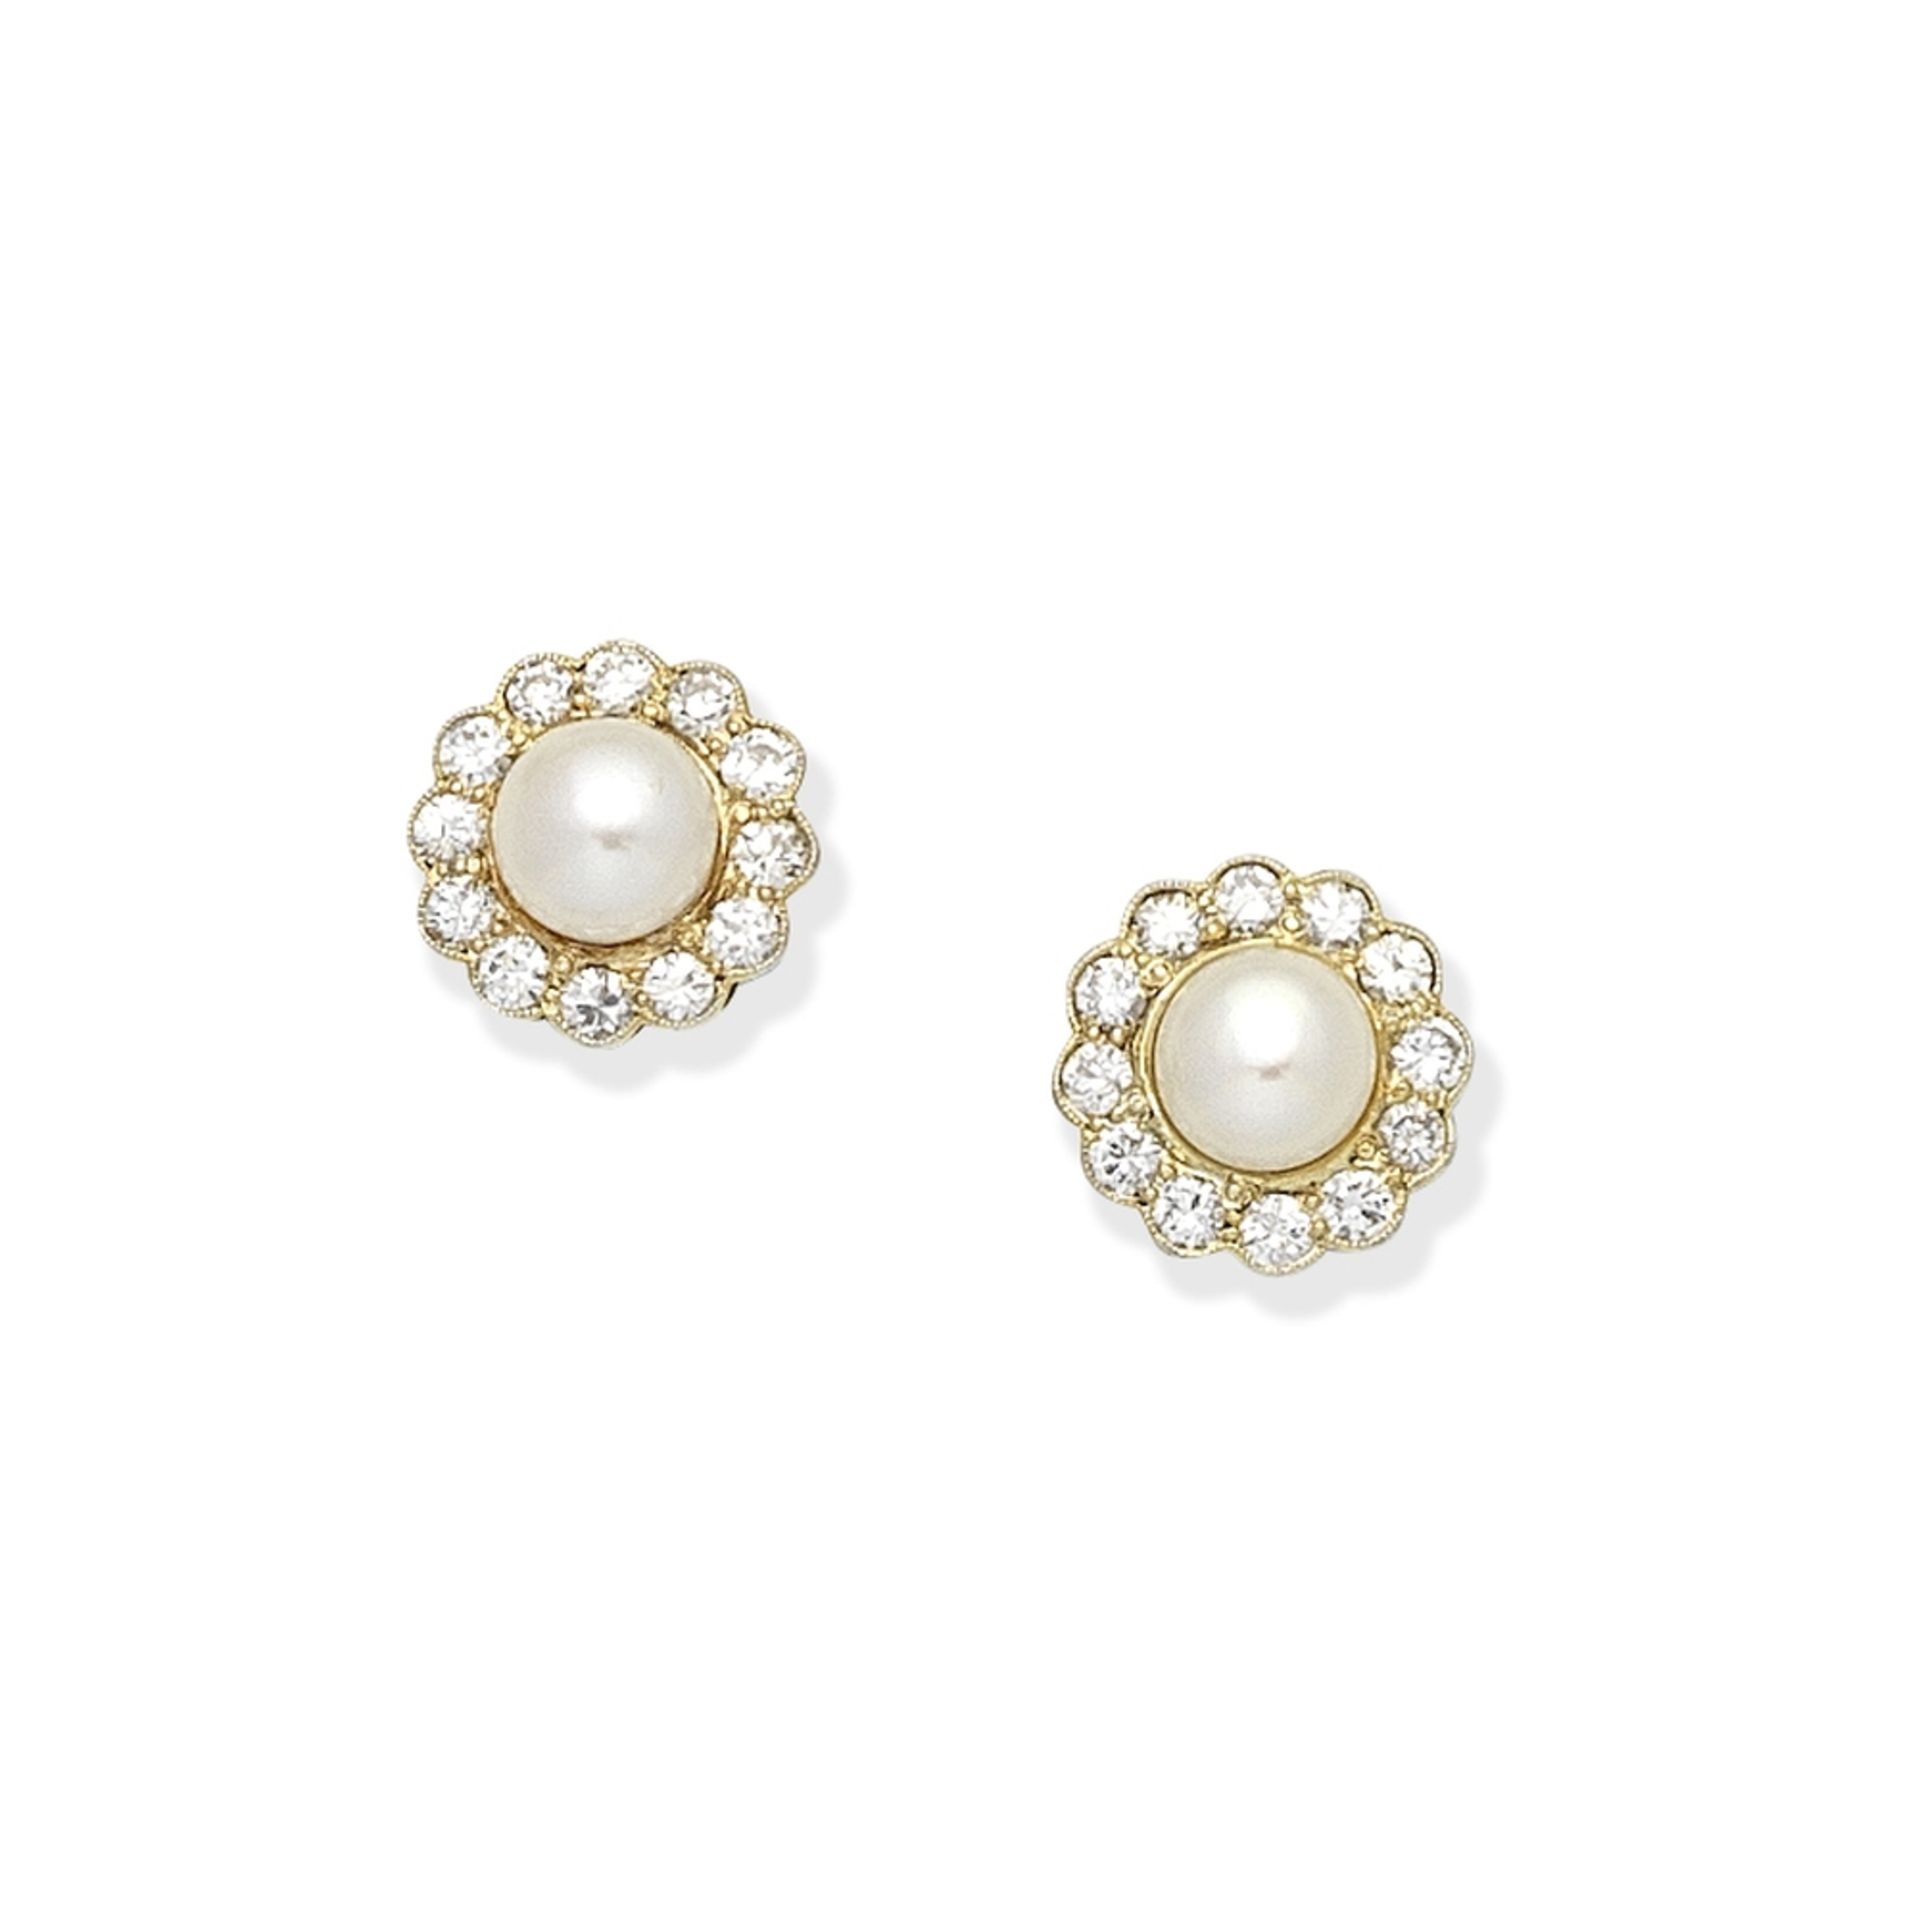 CULTURED PEARL AND DIAMOND CLUSTER EARRINGS